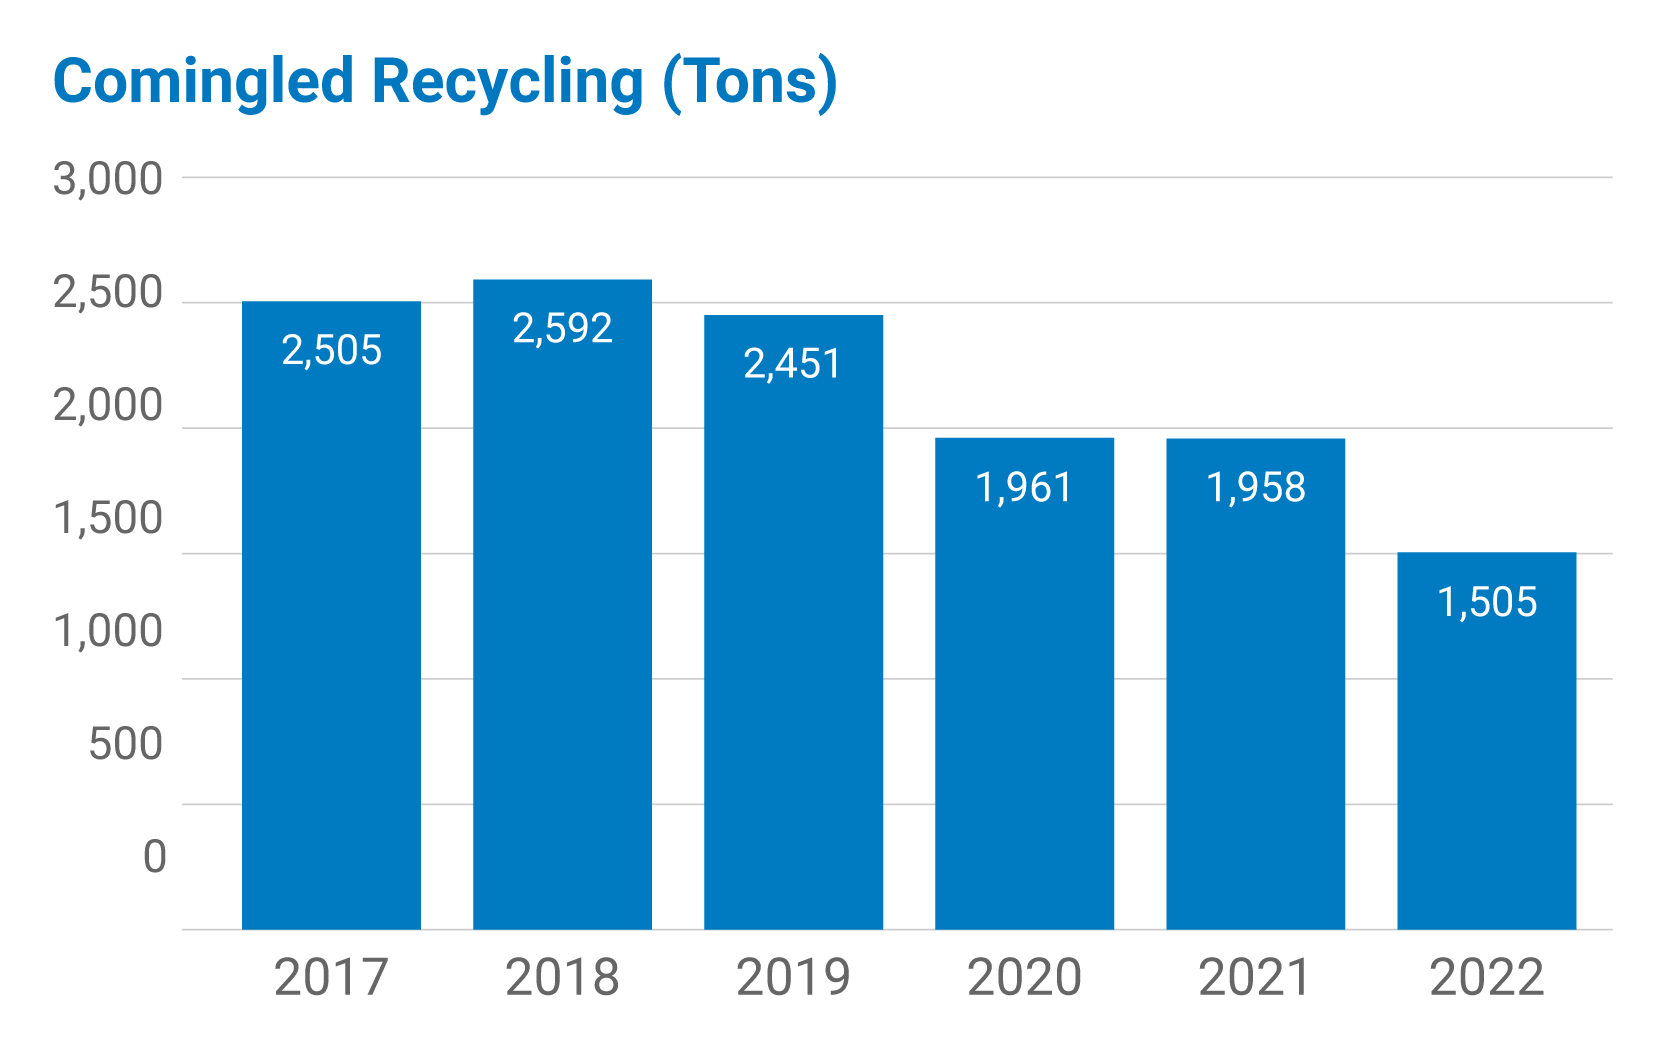 Comingled recycling (tons)